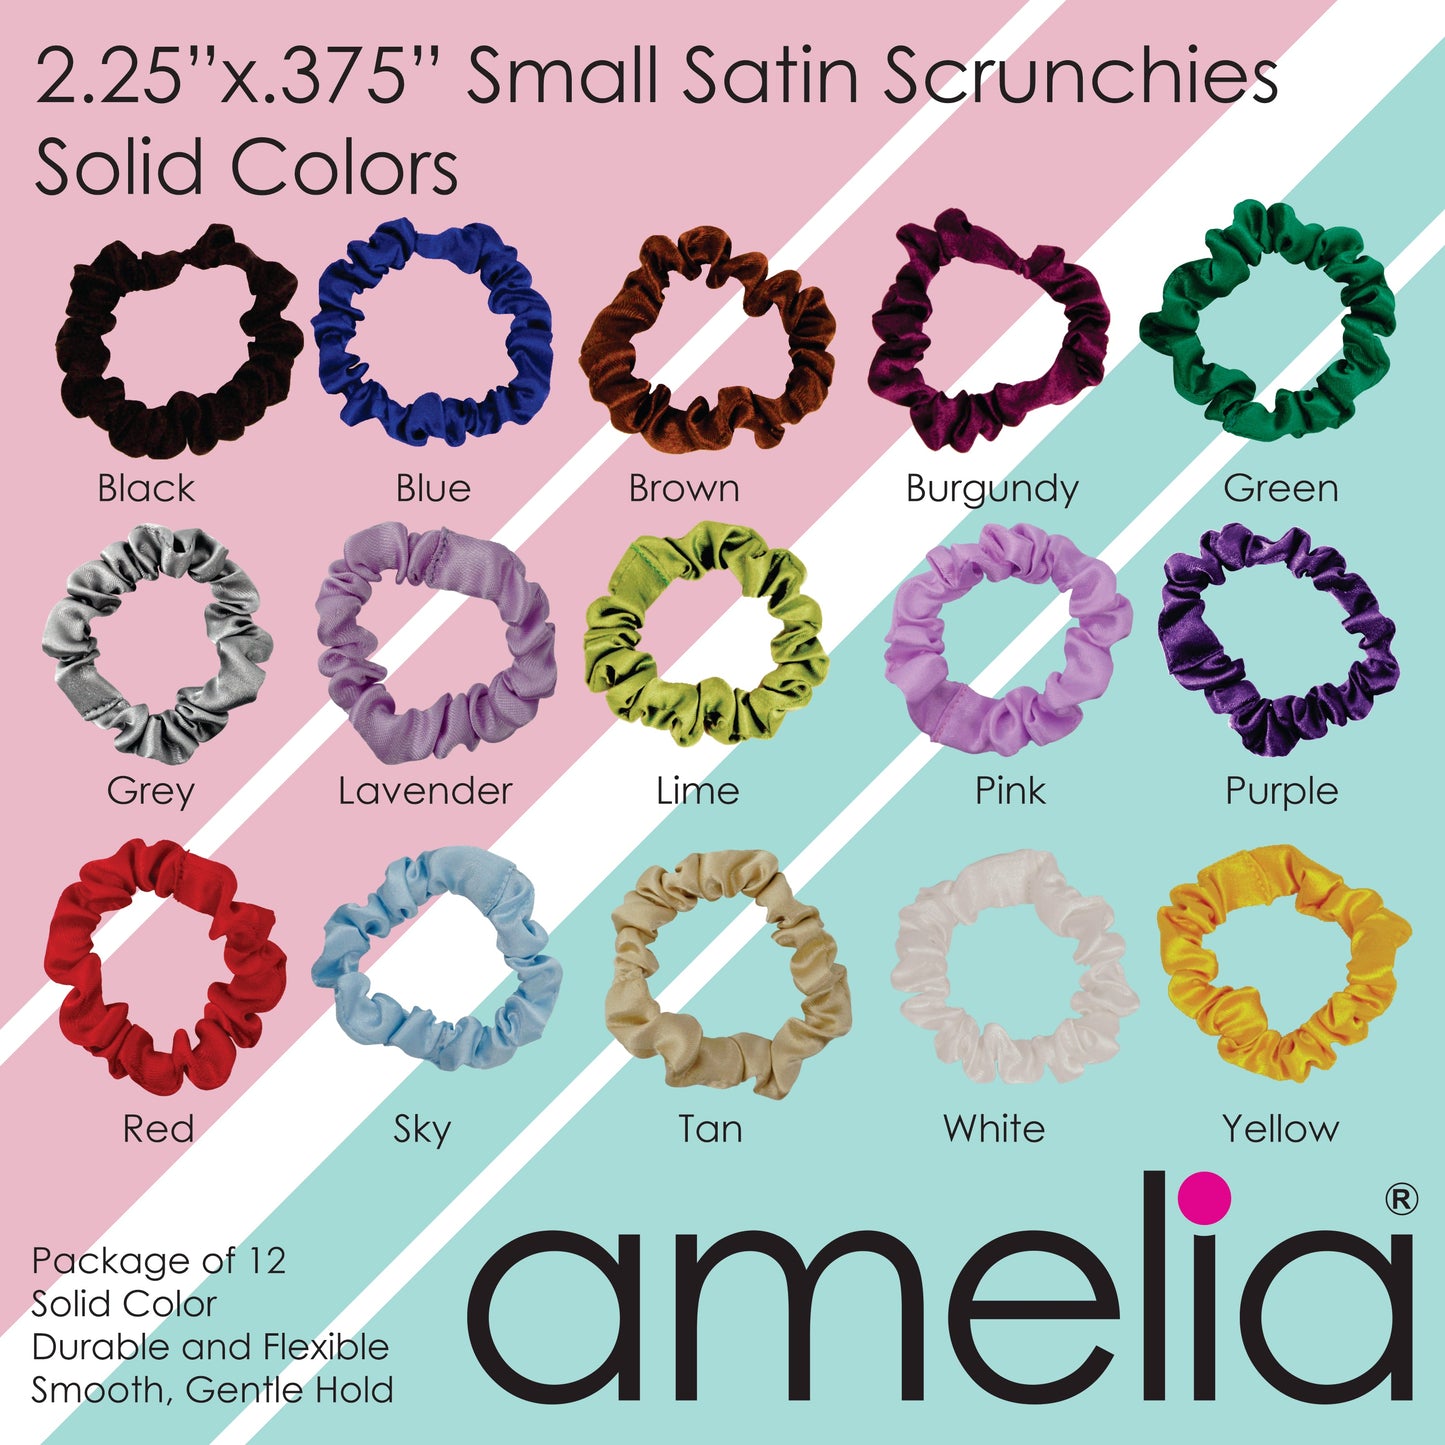 Amelia Beauty, Red, White and Green Satin Scrunchies, 2.25in Diameter, Gentle on Hair, Strong Hold, No Snag, No Dents or Creases. 12 Pack - 12 Retail Packs